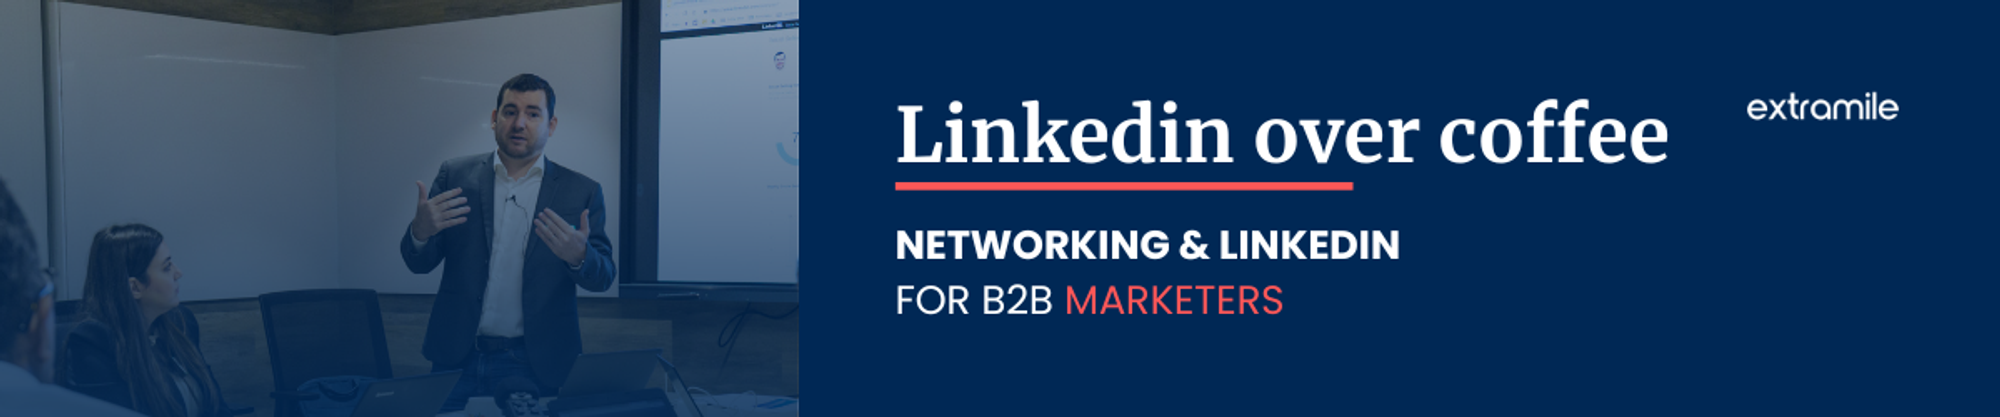 Linkedin over coffee | Networking & LinkedIn for B2B Marketers- December